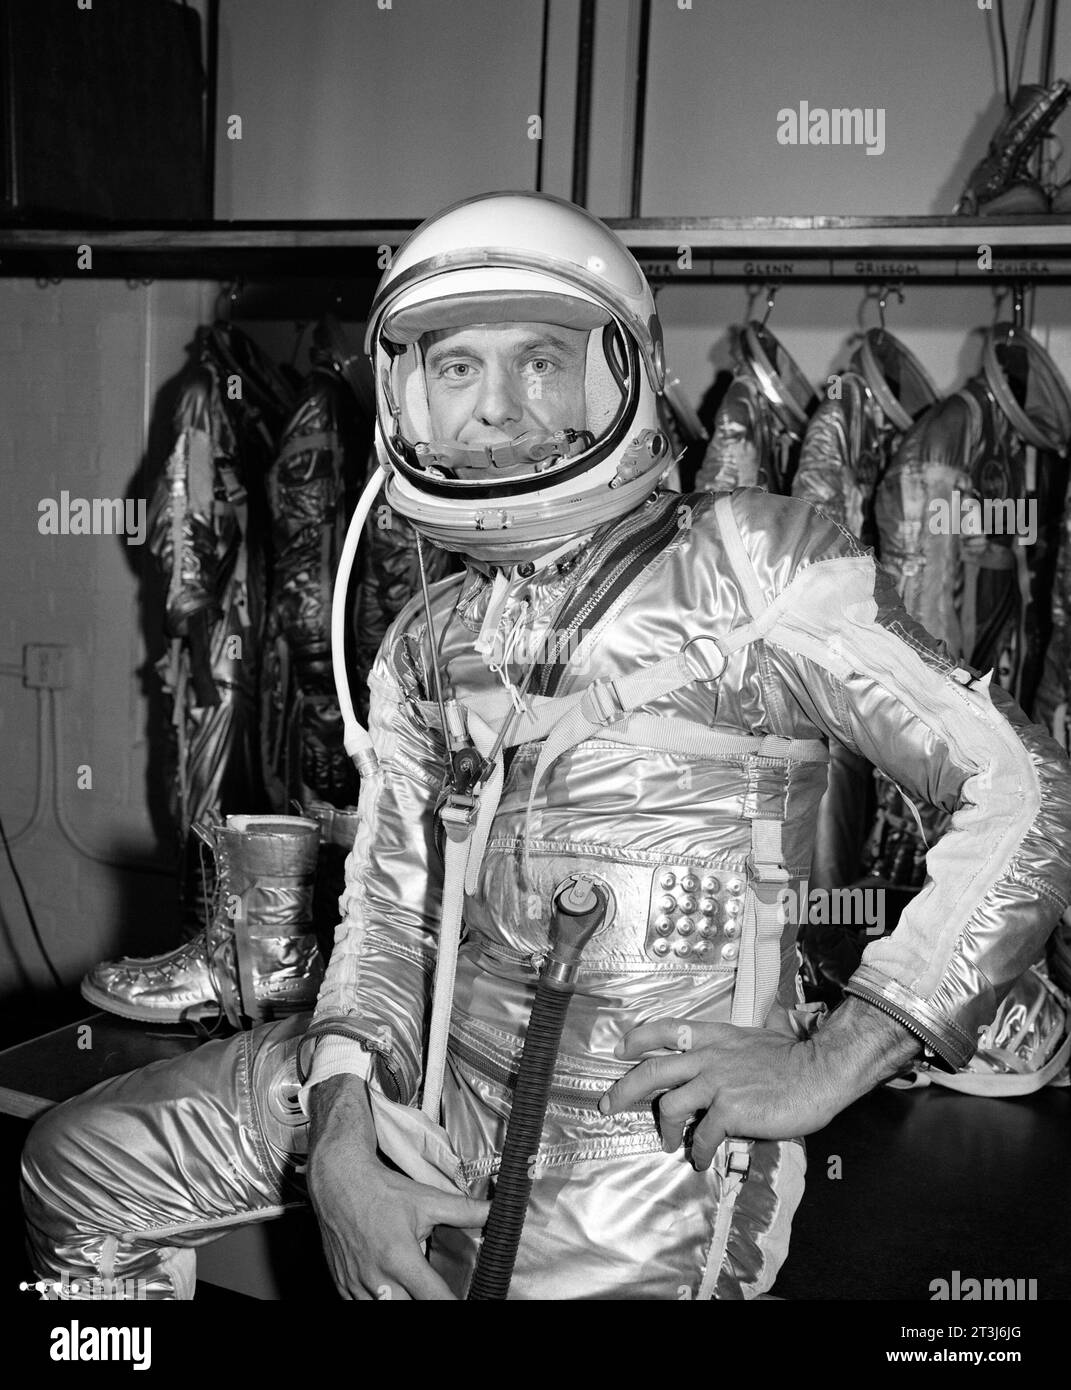 Astronaut Alan Shepard, astronaut Alan B. Shepard Jr. in his pressure suit, with helmet opened, for the Mercury-Redstone 3 (MR-3) flight, the first American human spaceflight. Stock Photo